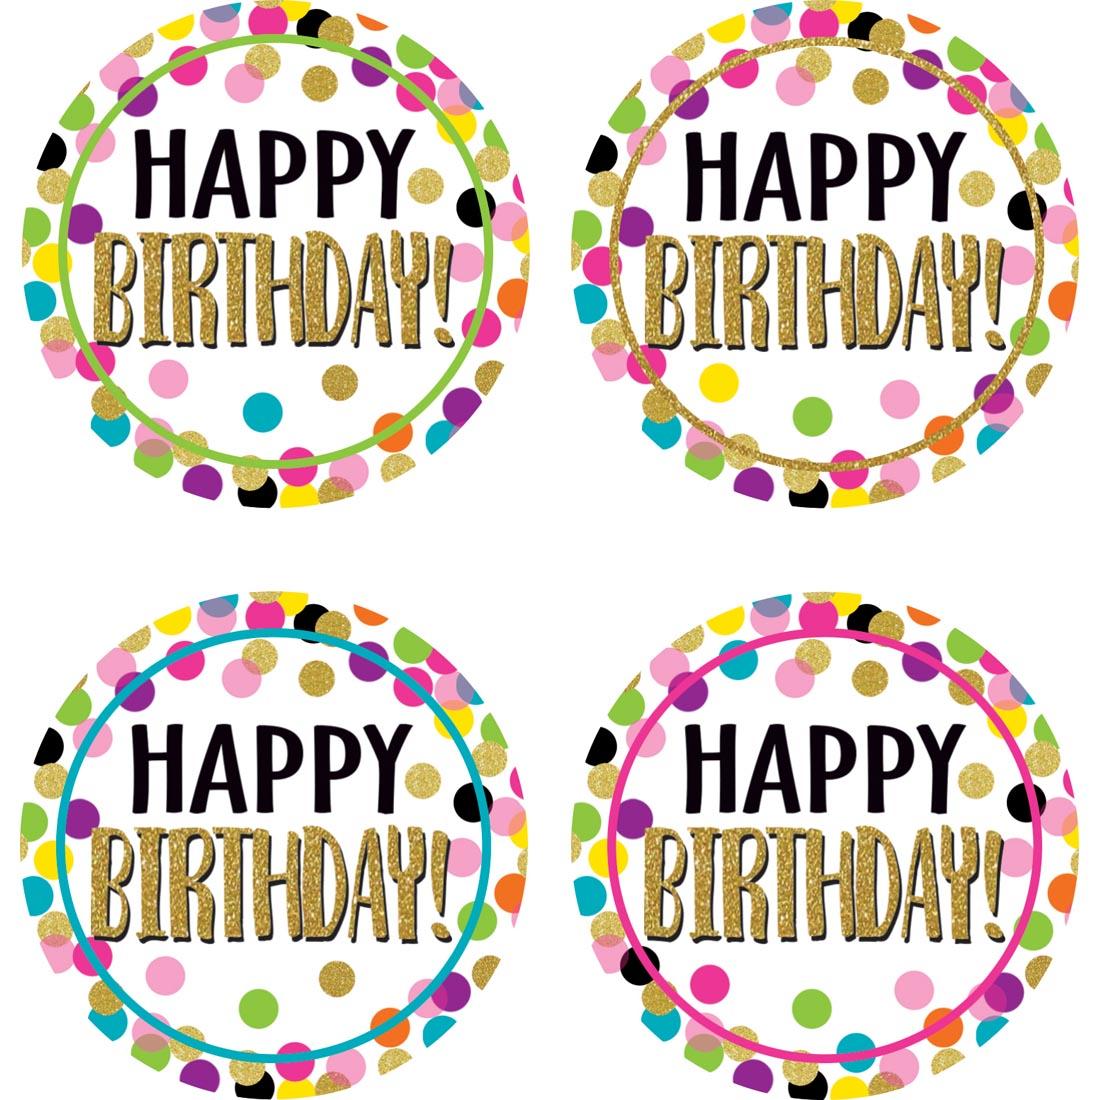 Happy Birthday Wear'Em Badges from the Confetti collection by Teacher Created Resources